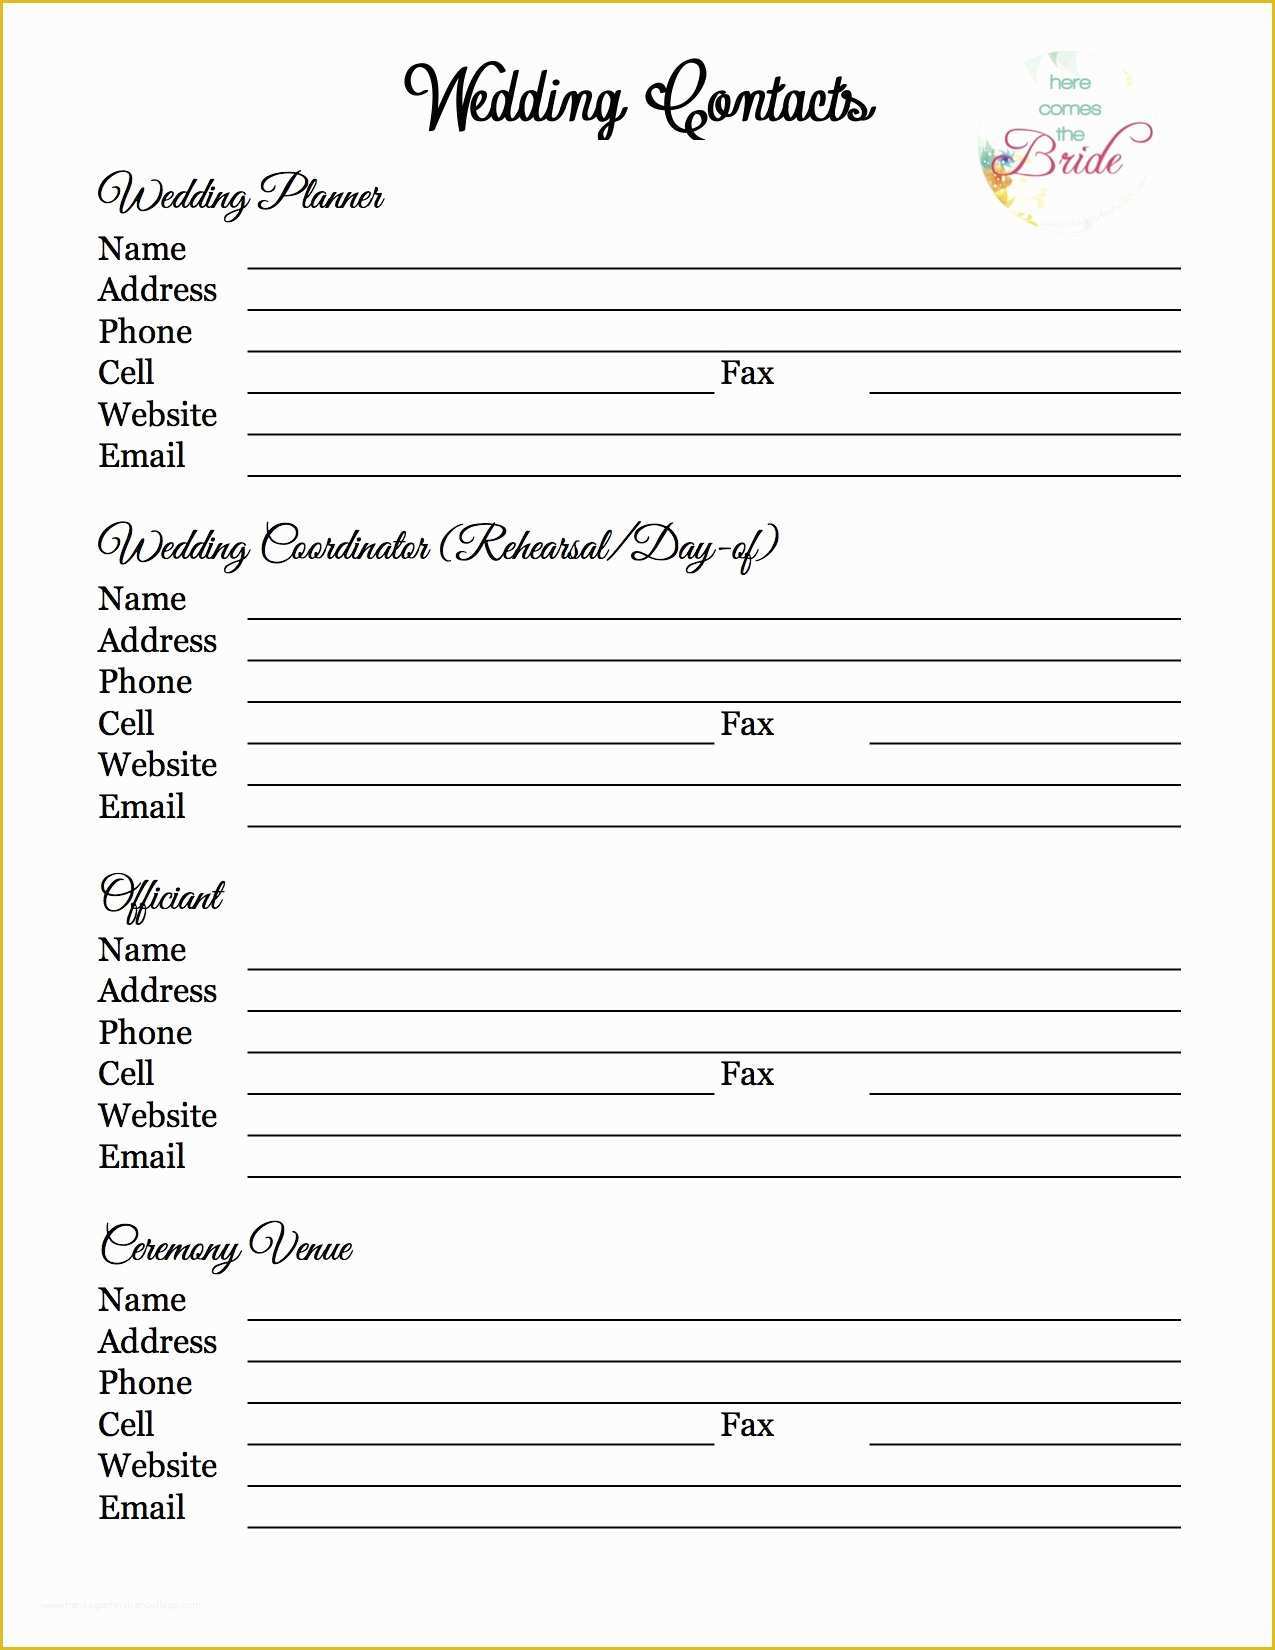 wedding-planner-template-free-of-wedding-planner-with-free-printables